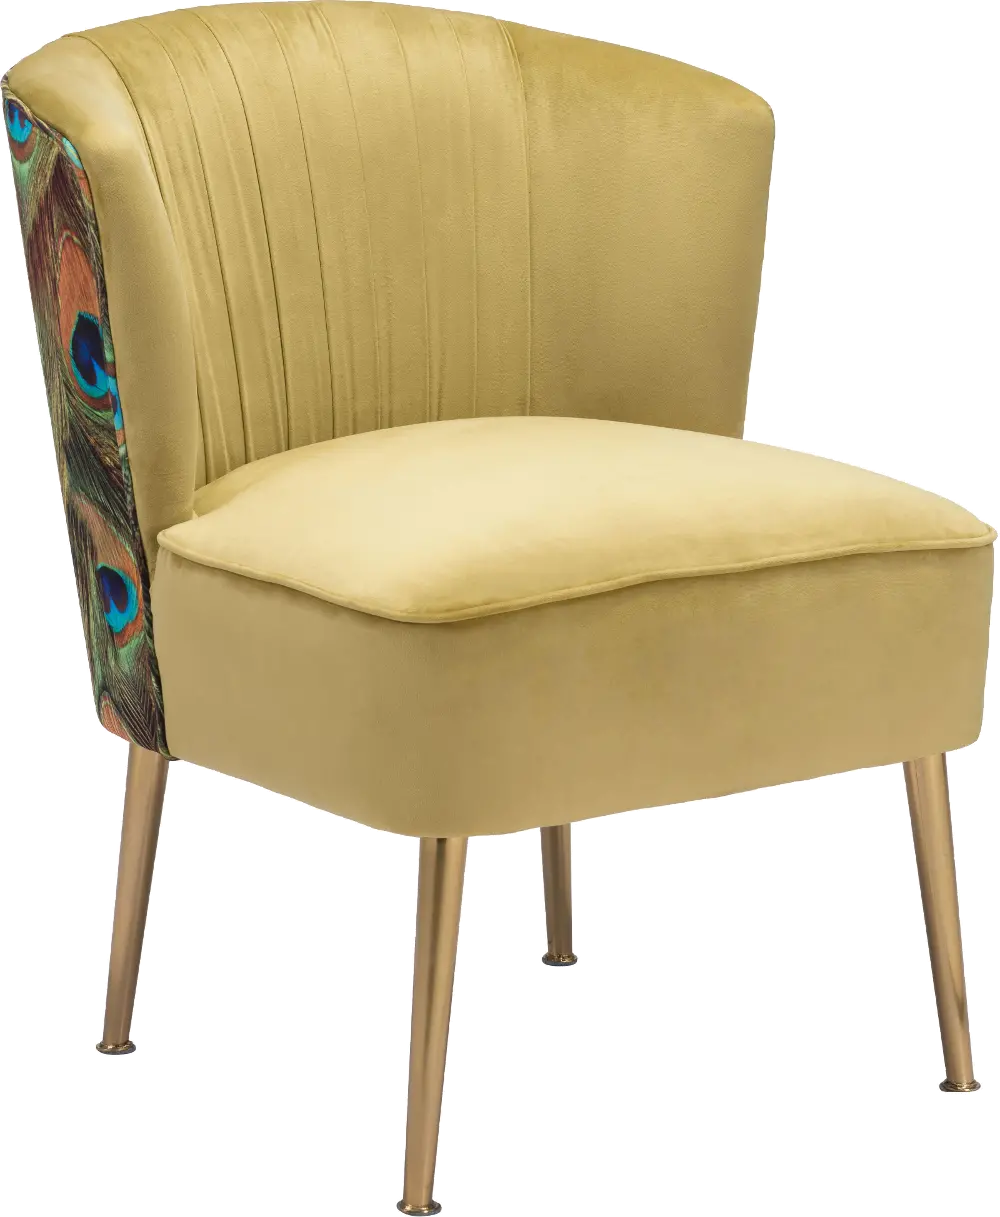 Glam Gold Velvet and Peacock Printed Accent Chair - Tabitha-1